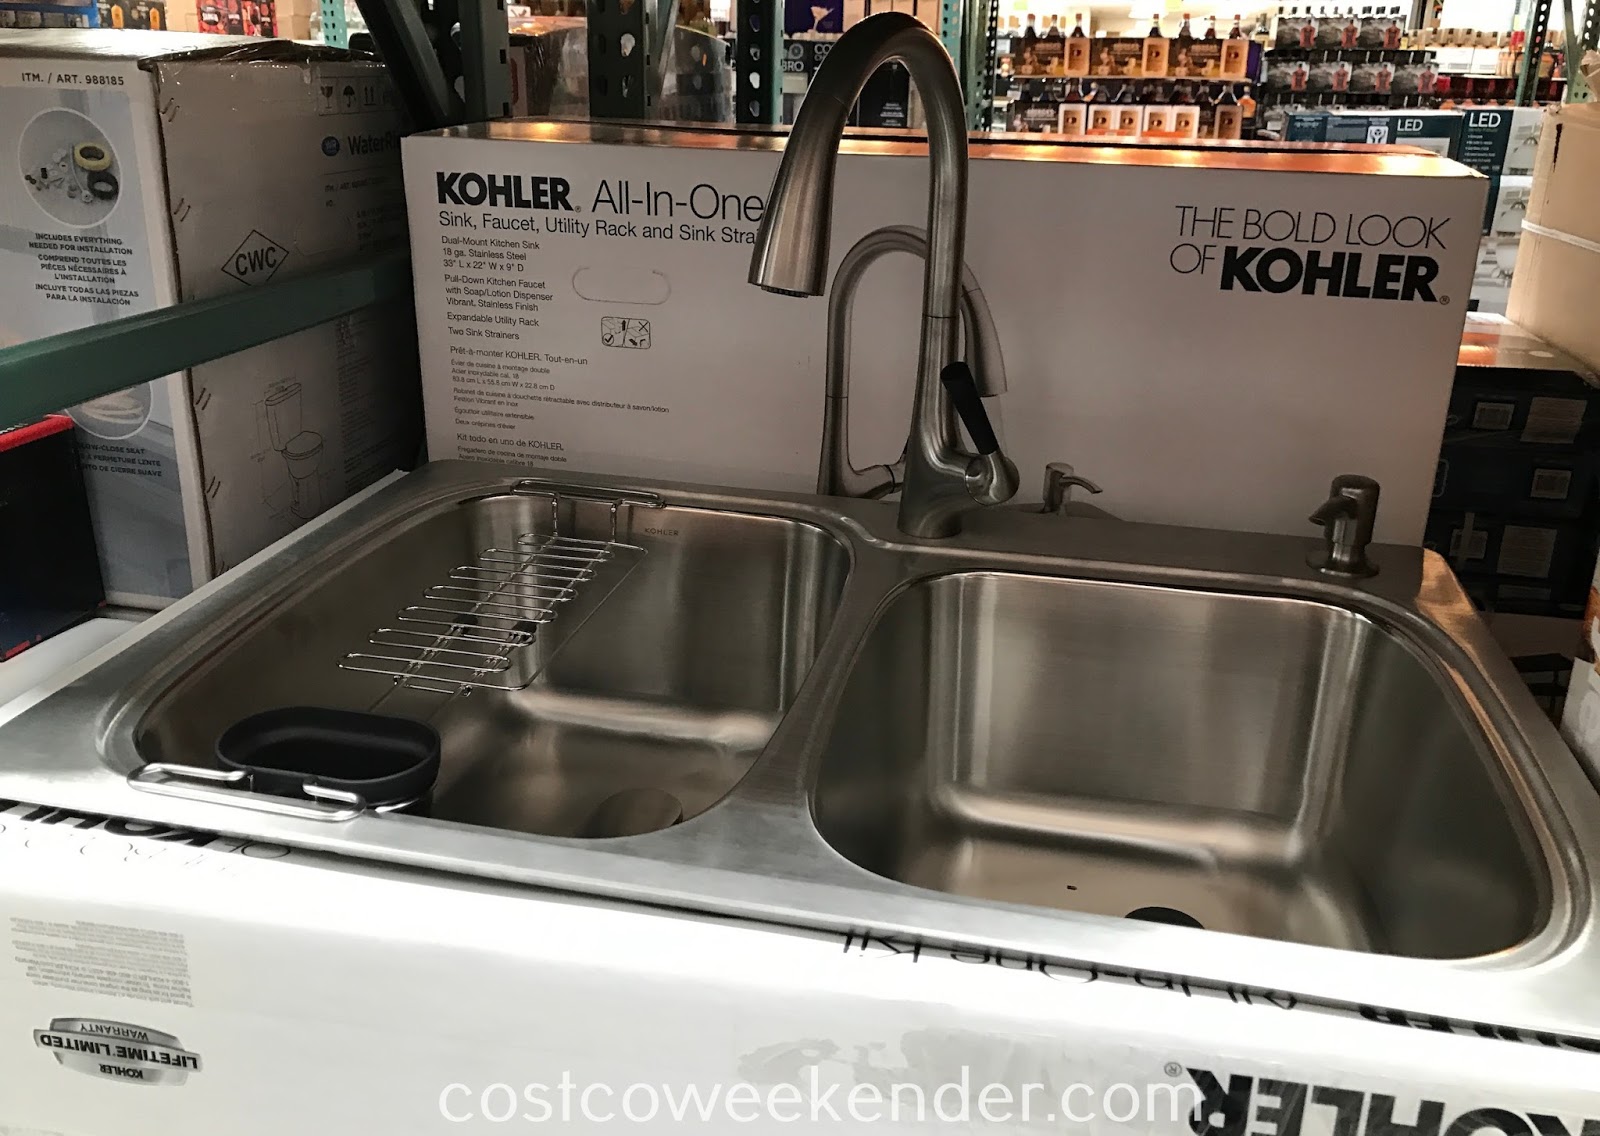 Kohler All In One Stainless Steel Sink And Faucet Kit Costco